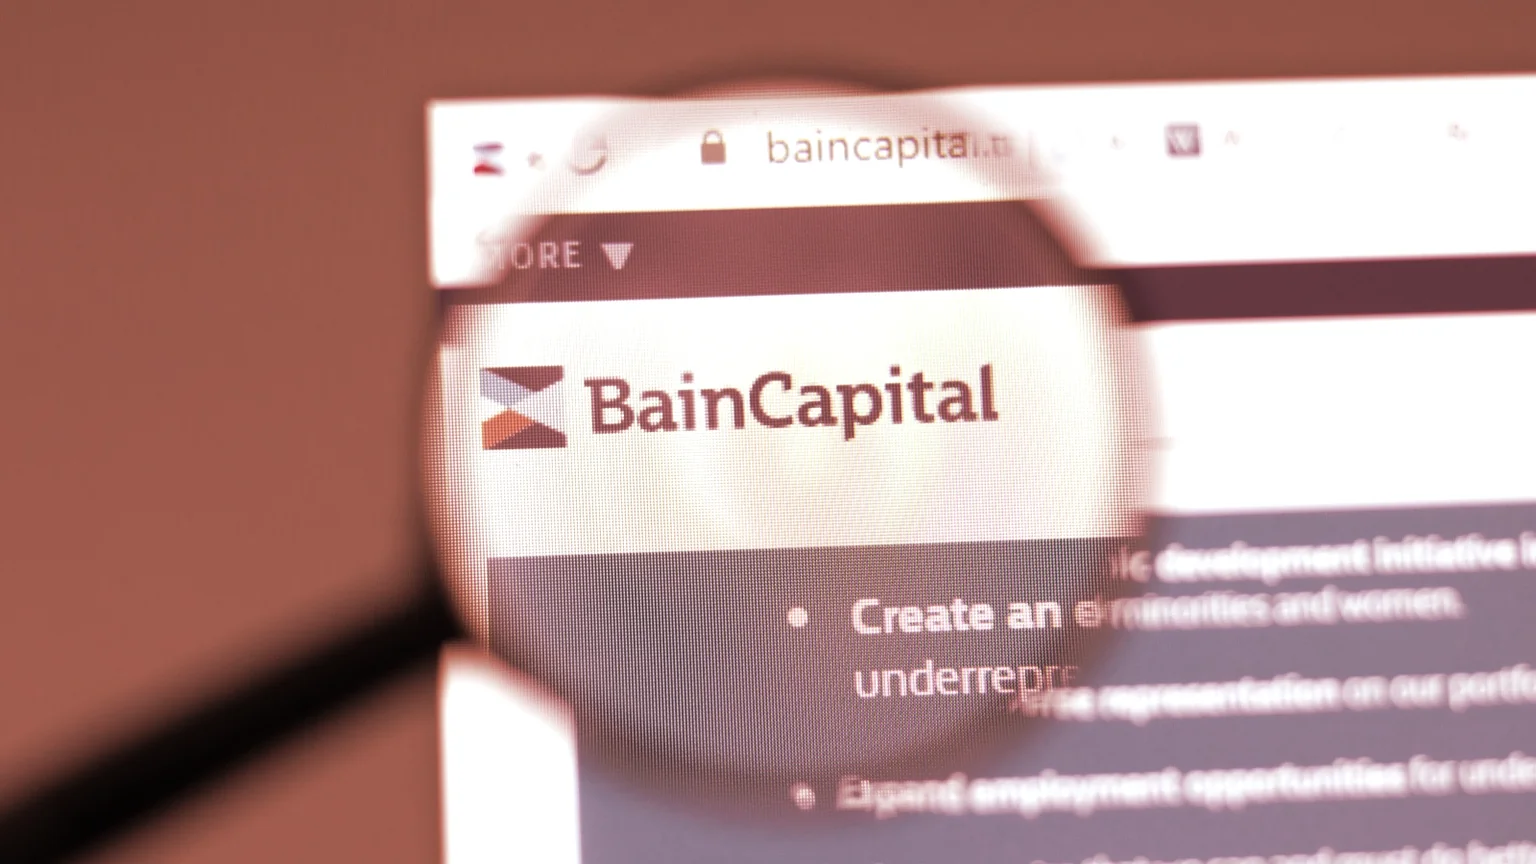 Bain Capital is an American investment firm. Image: Shutterstock.